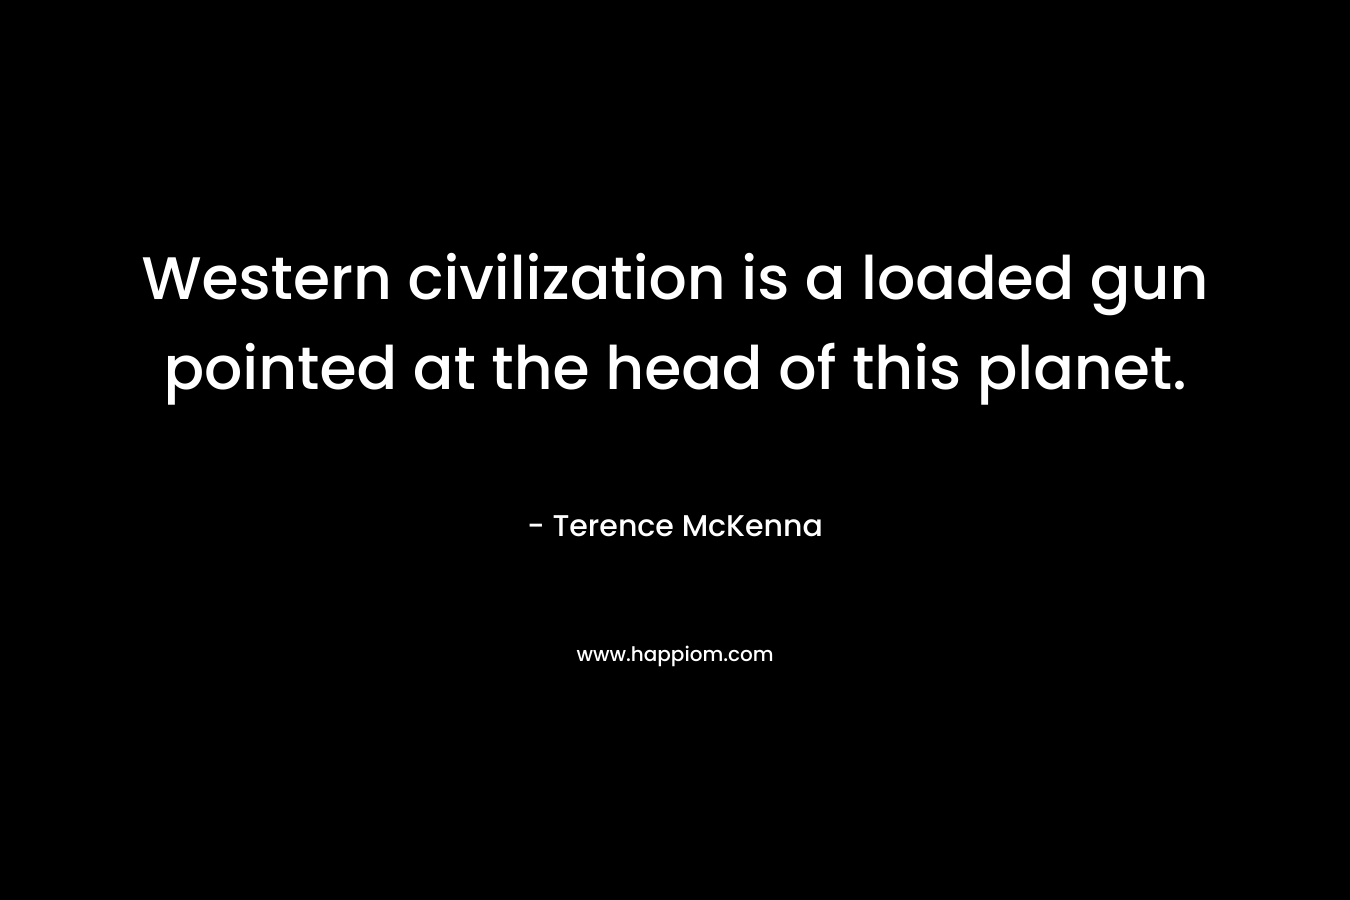 Western civilization is a loaded gun pointed at the head of this planet. – Terence McKenna